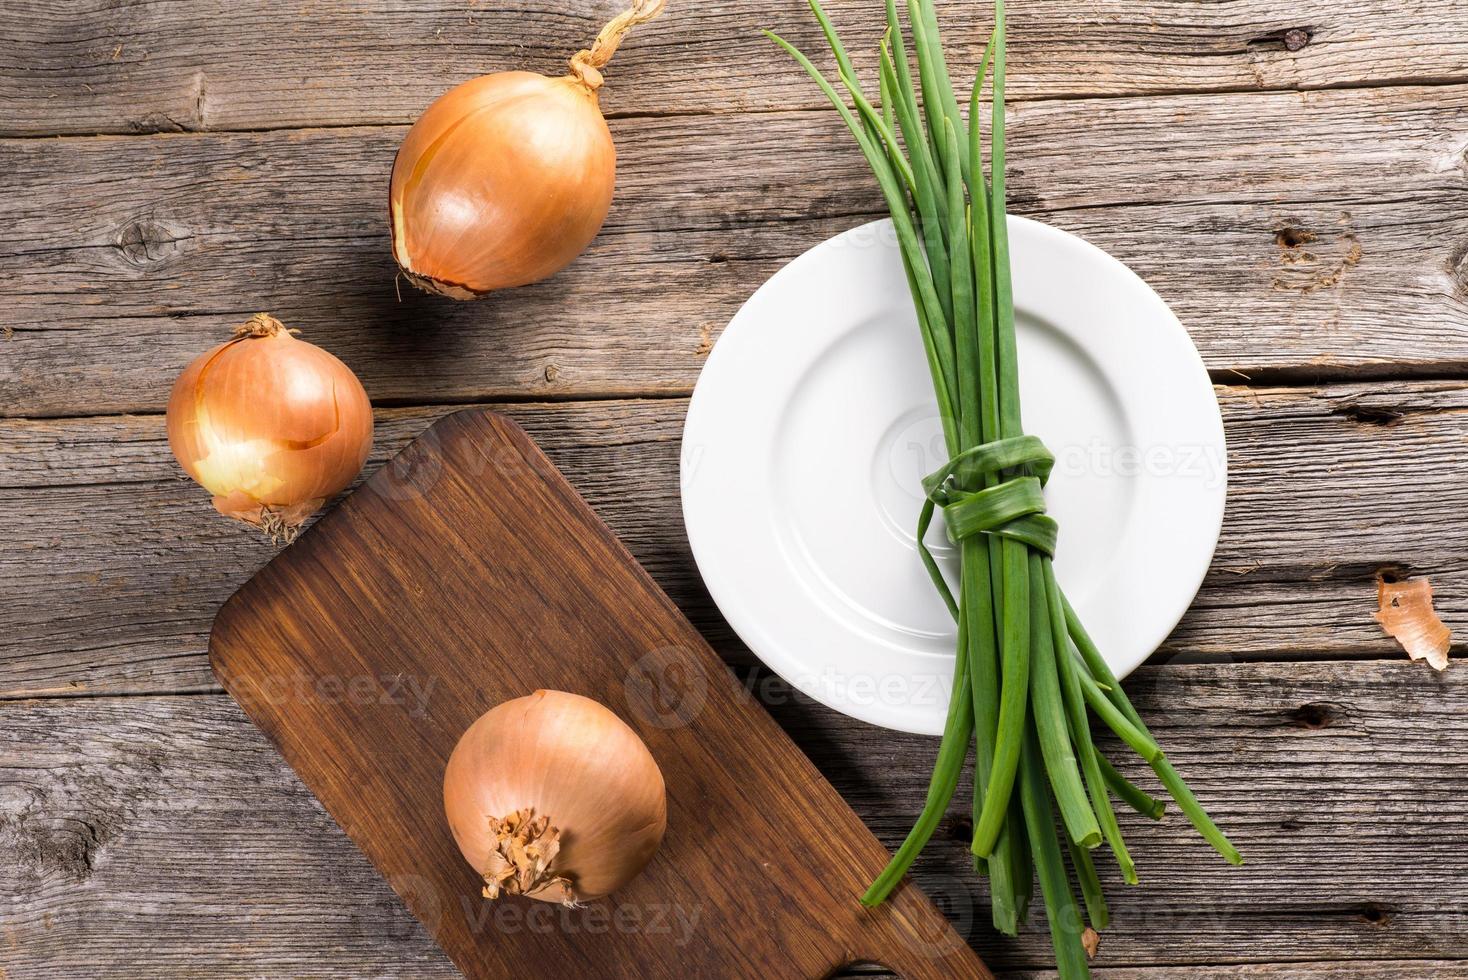 Chive and onion photo